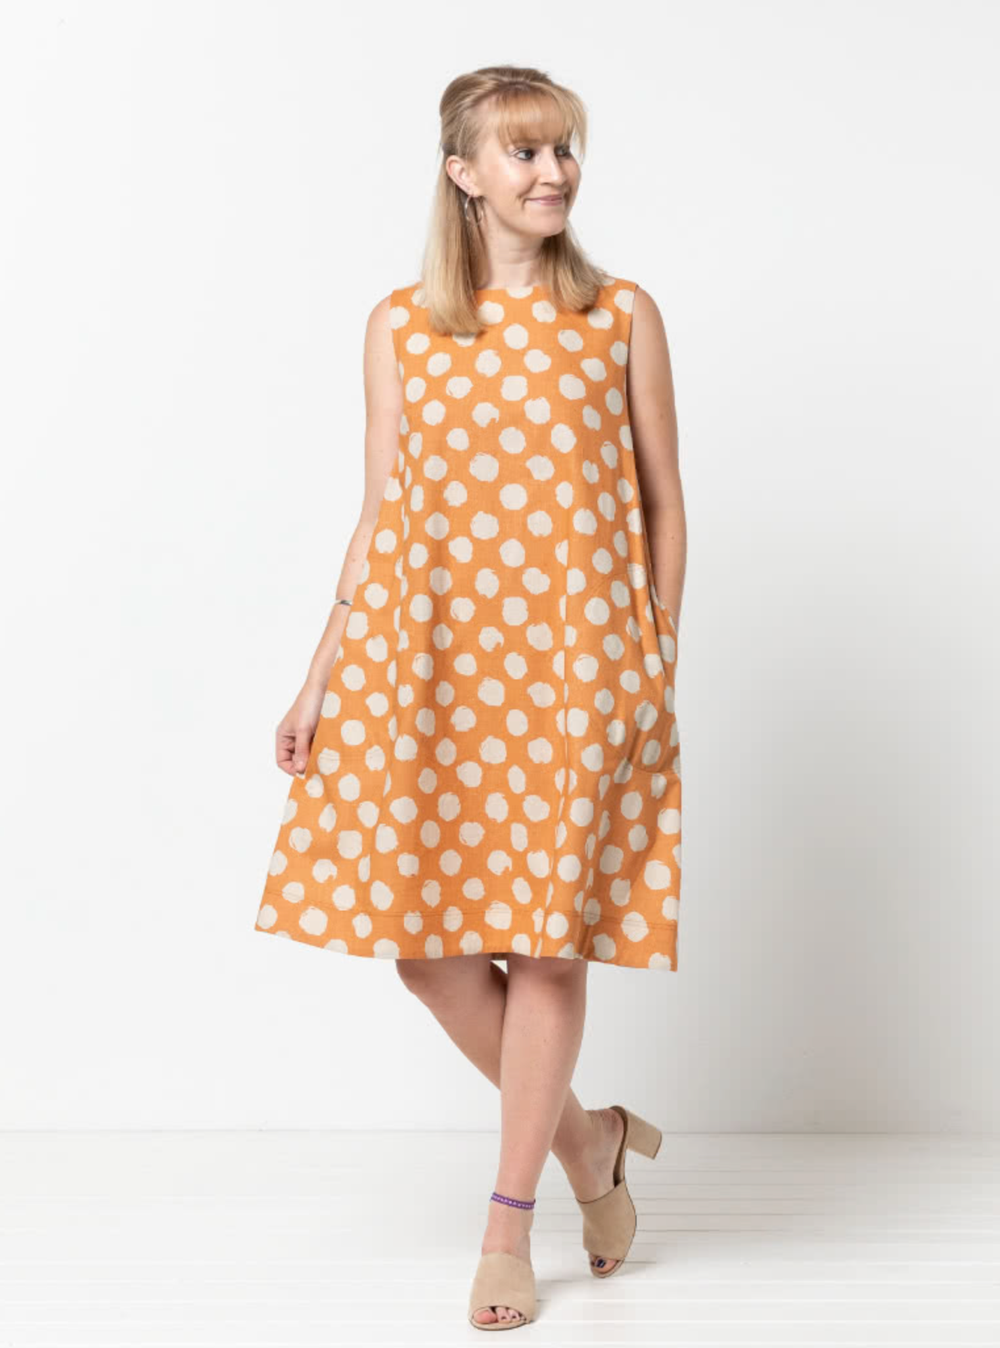 Woman wearing the Lena Shift Dress sewing pattern from Style Arc on The Fold Line. A shift dress pattern made in cotton, linen, or crepe fabrics, featuring an A-line silhouette, sleeveless, boat neck, large side pockets, and below knee length.